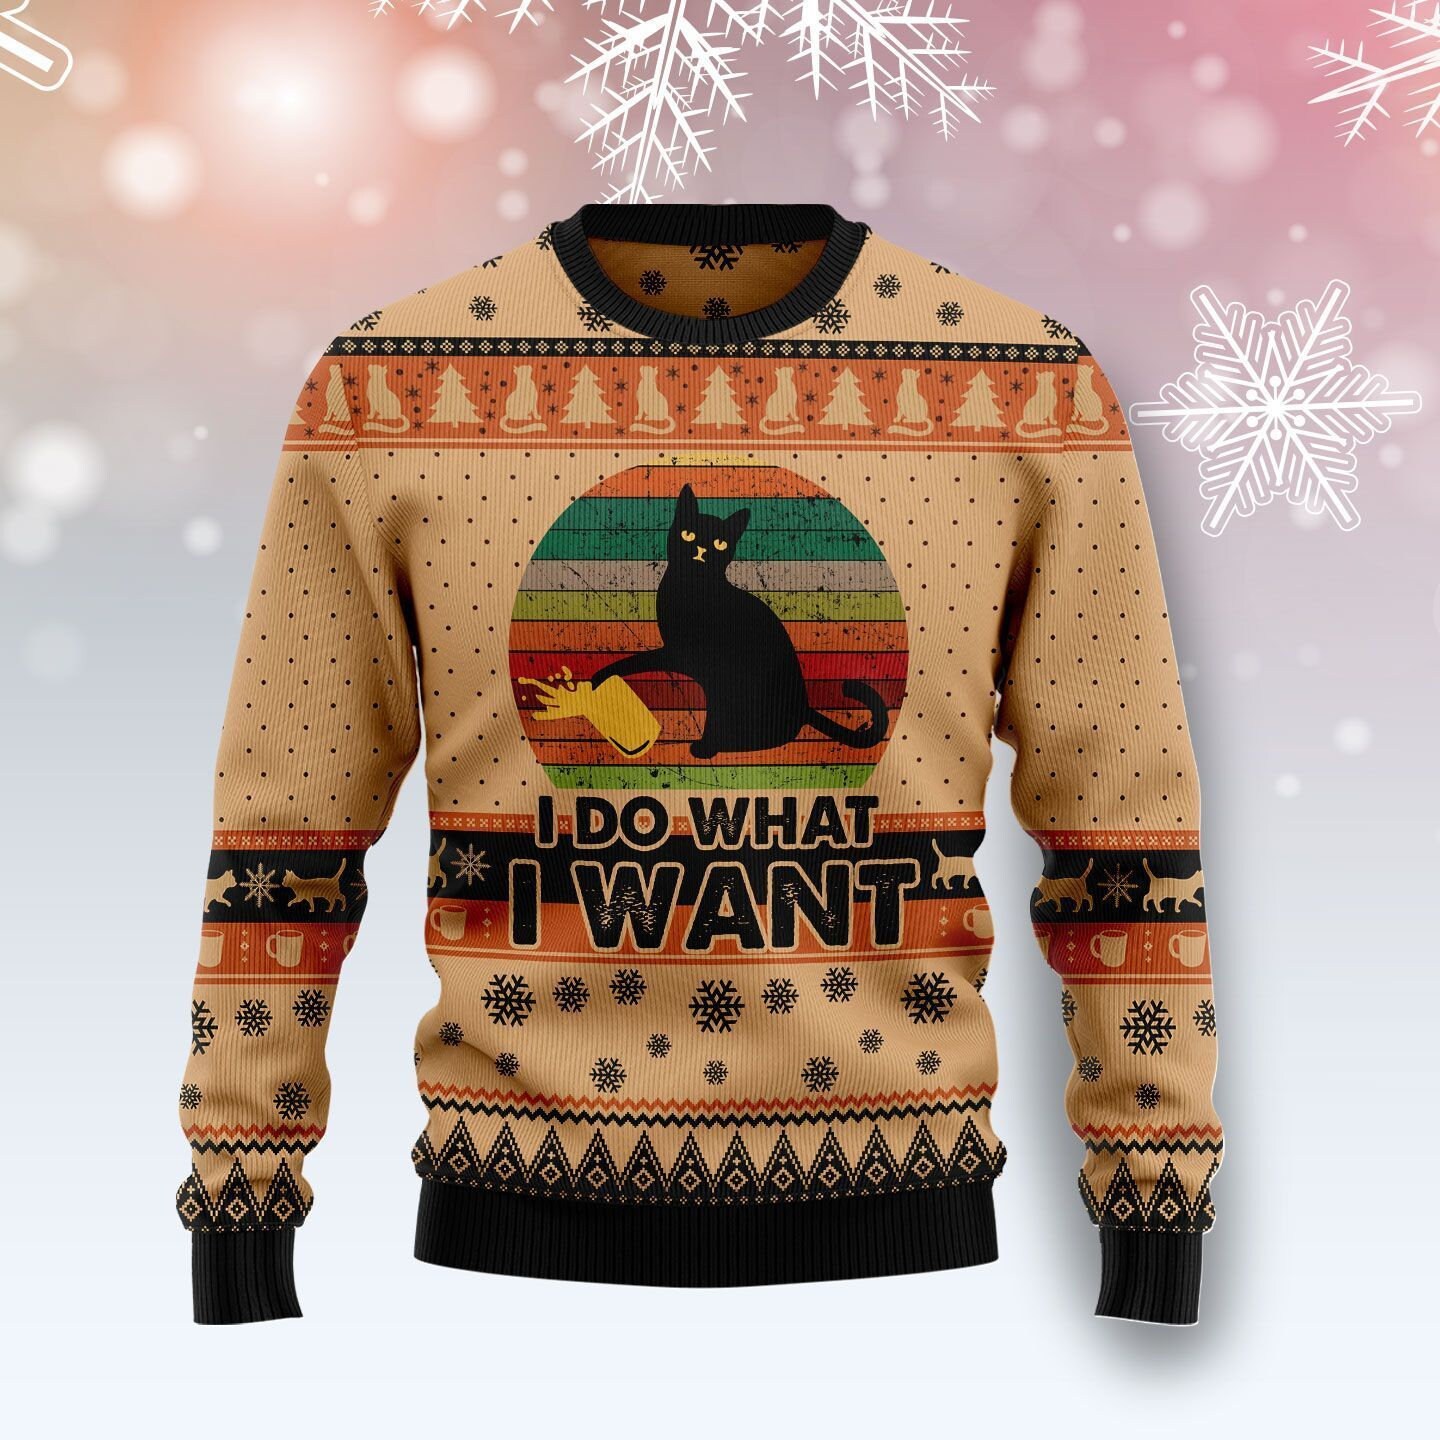 I Do What A Want Black Cat Ugly Christmas Happy Xmas Wool Knitted Sweater